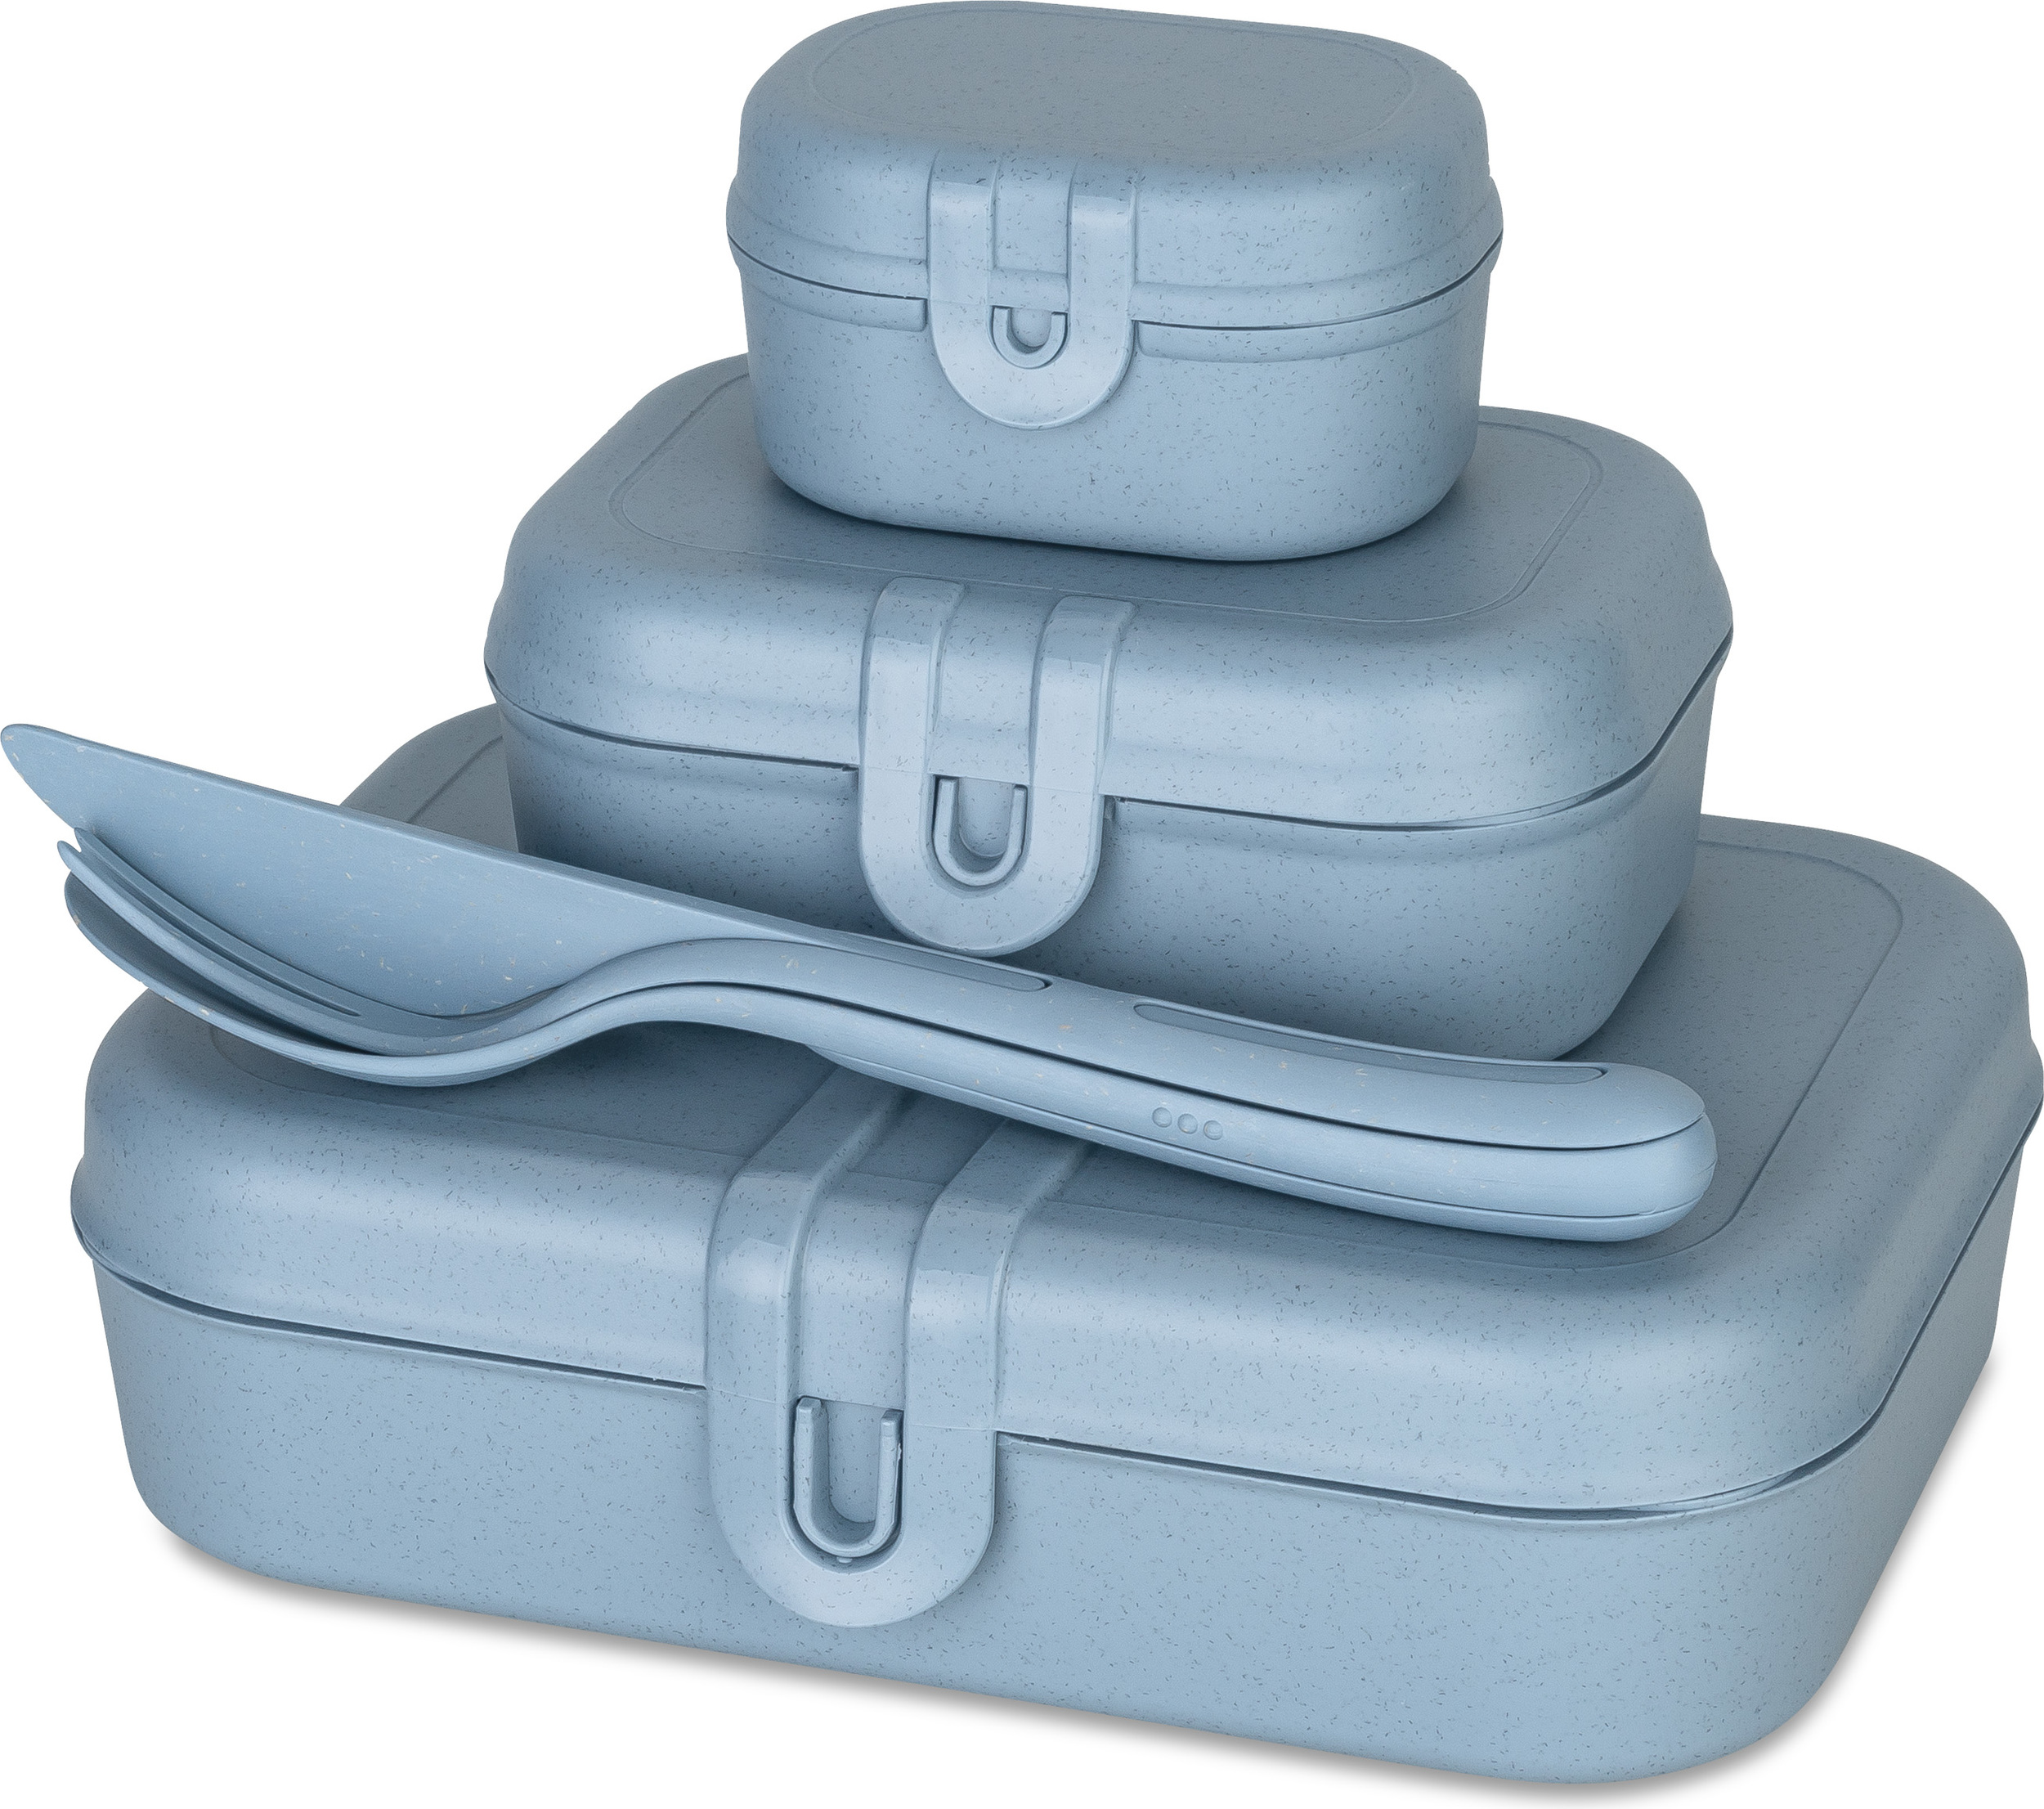 Lunch box set PASCAL READY, with travel cutlery set, light blue, Koziol 